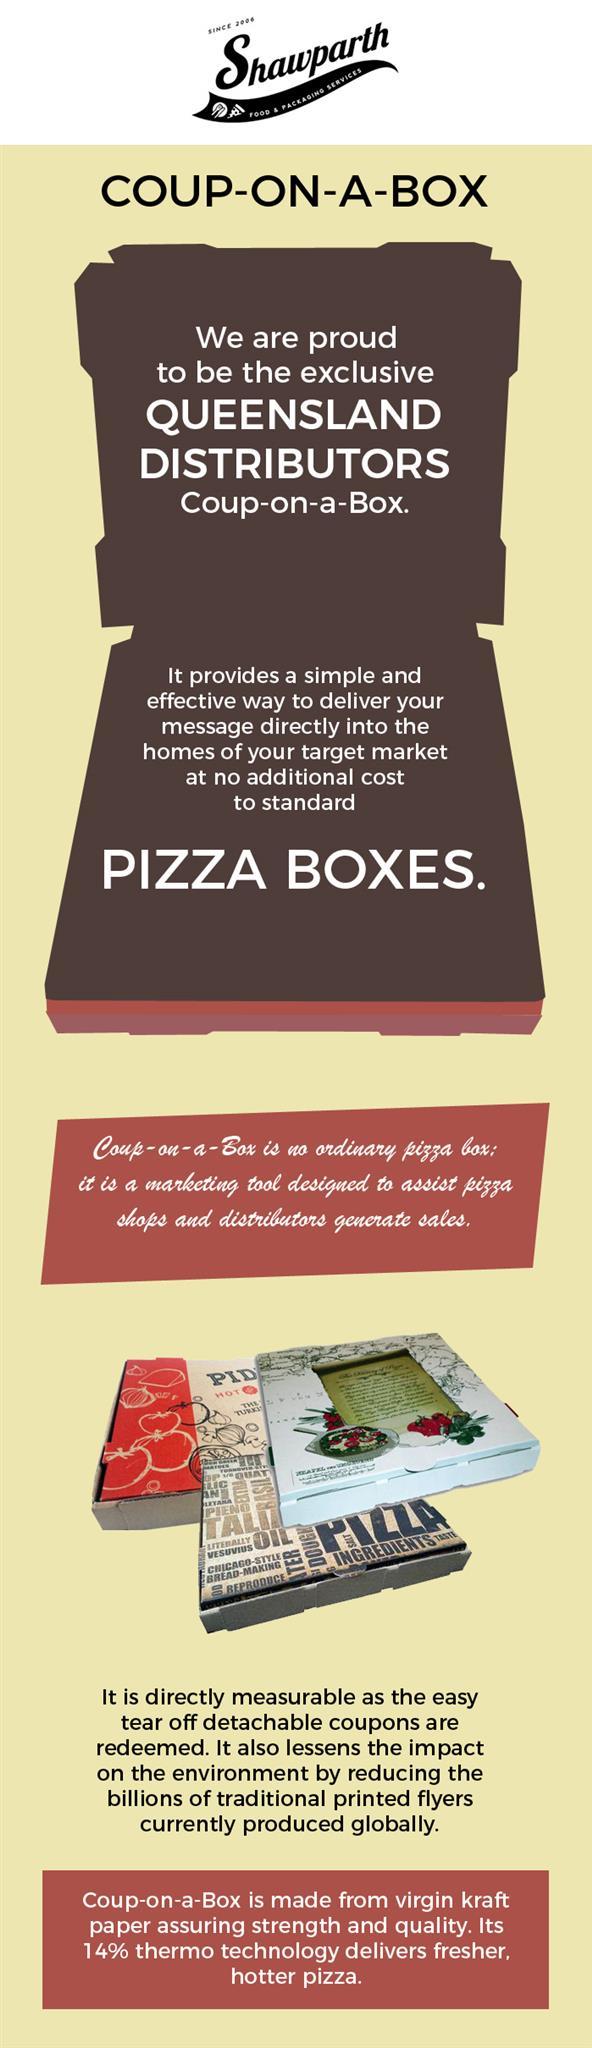 Shawparth Food & Packaging - A Wholesale Pizza Boxes Distributor in Brisbane